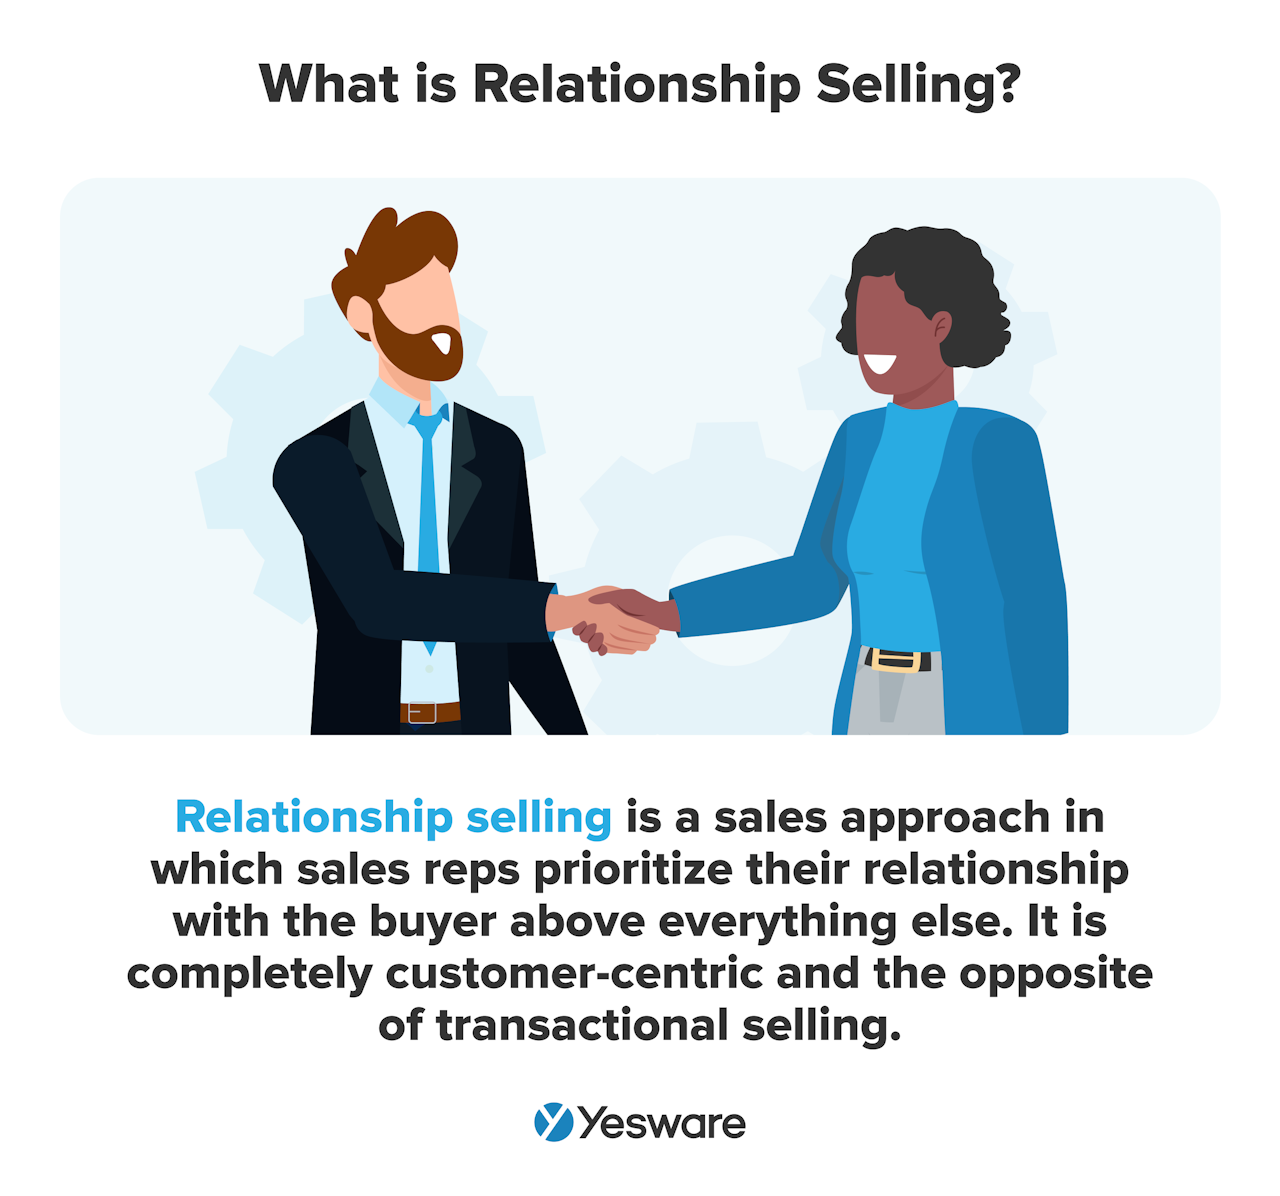 what is relationship selling?